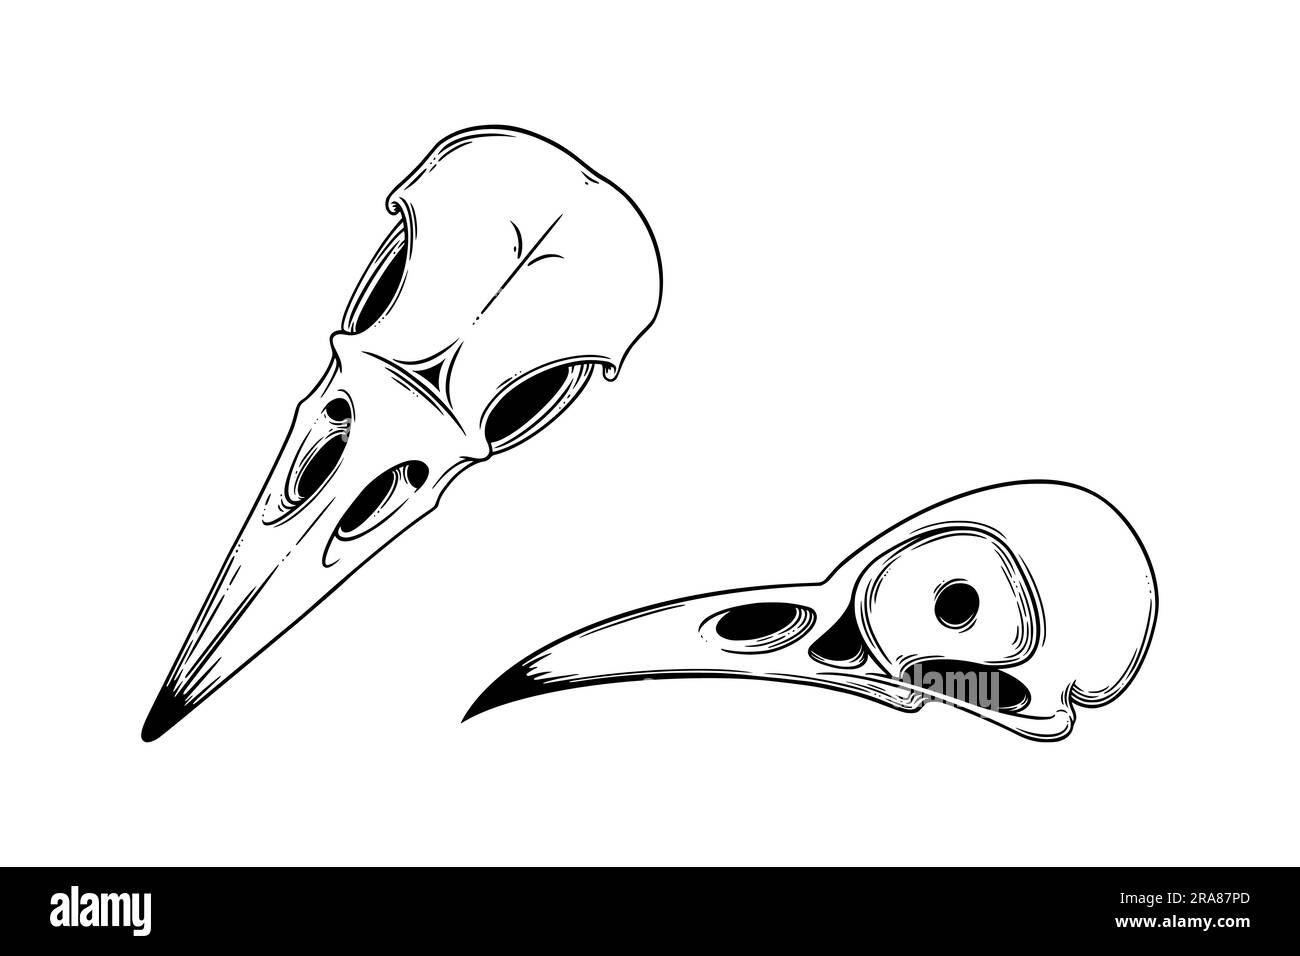 Crow skull sketch fornt and side view. Halloween skull for spooky ...